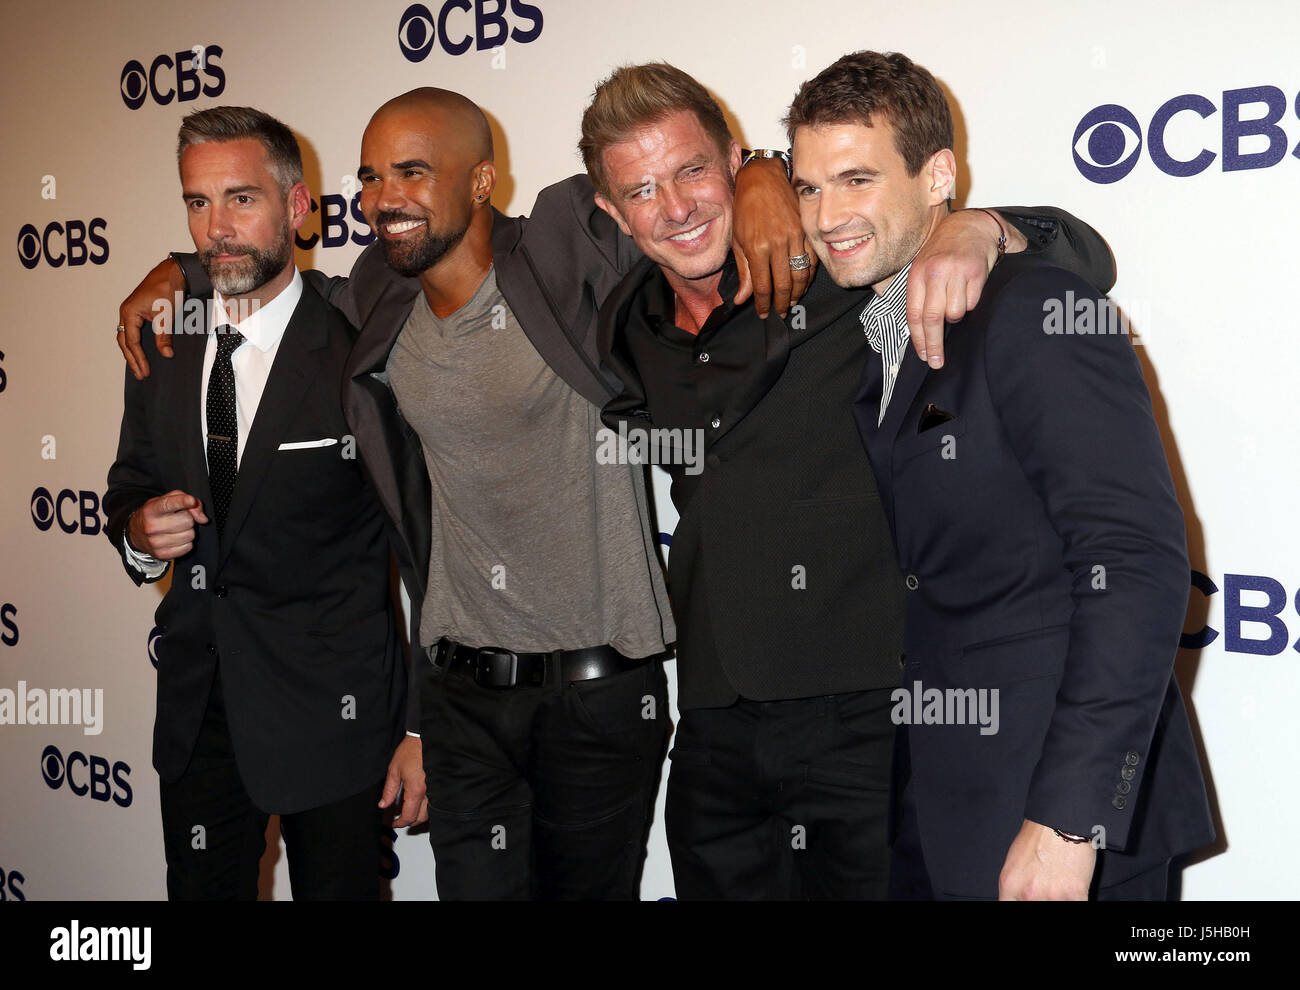 New York, New York, USA. 17th May, 2017. Actors JAY HARRINGTON, SHEMAR  MOORE, KENNY JOHNSON and ALEX RUSSELL attend the 2017 CBS Upfront held at  the Plaza Hotel. Credit: Nancy Kaszerman/ZUMA Wire/Alamy